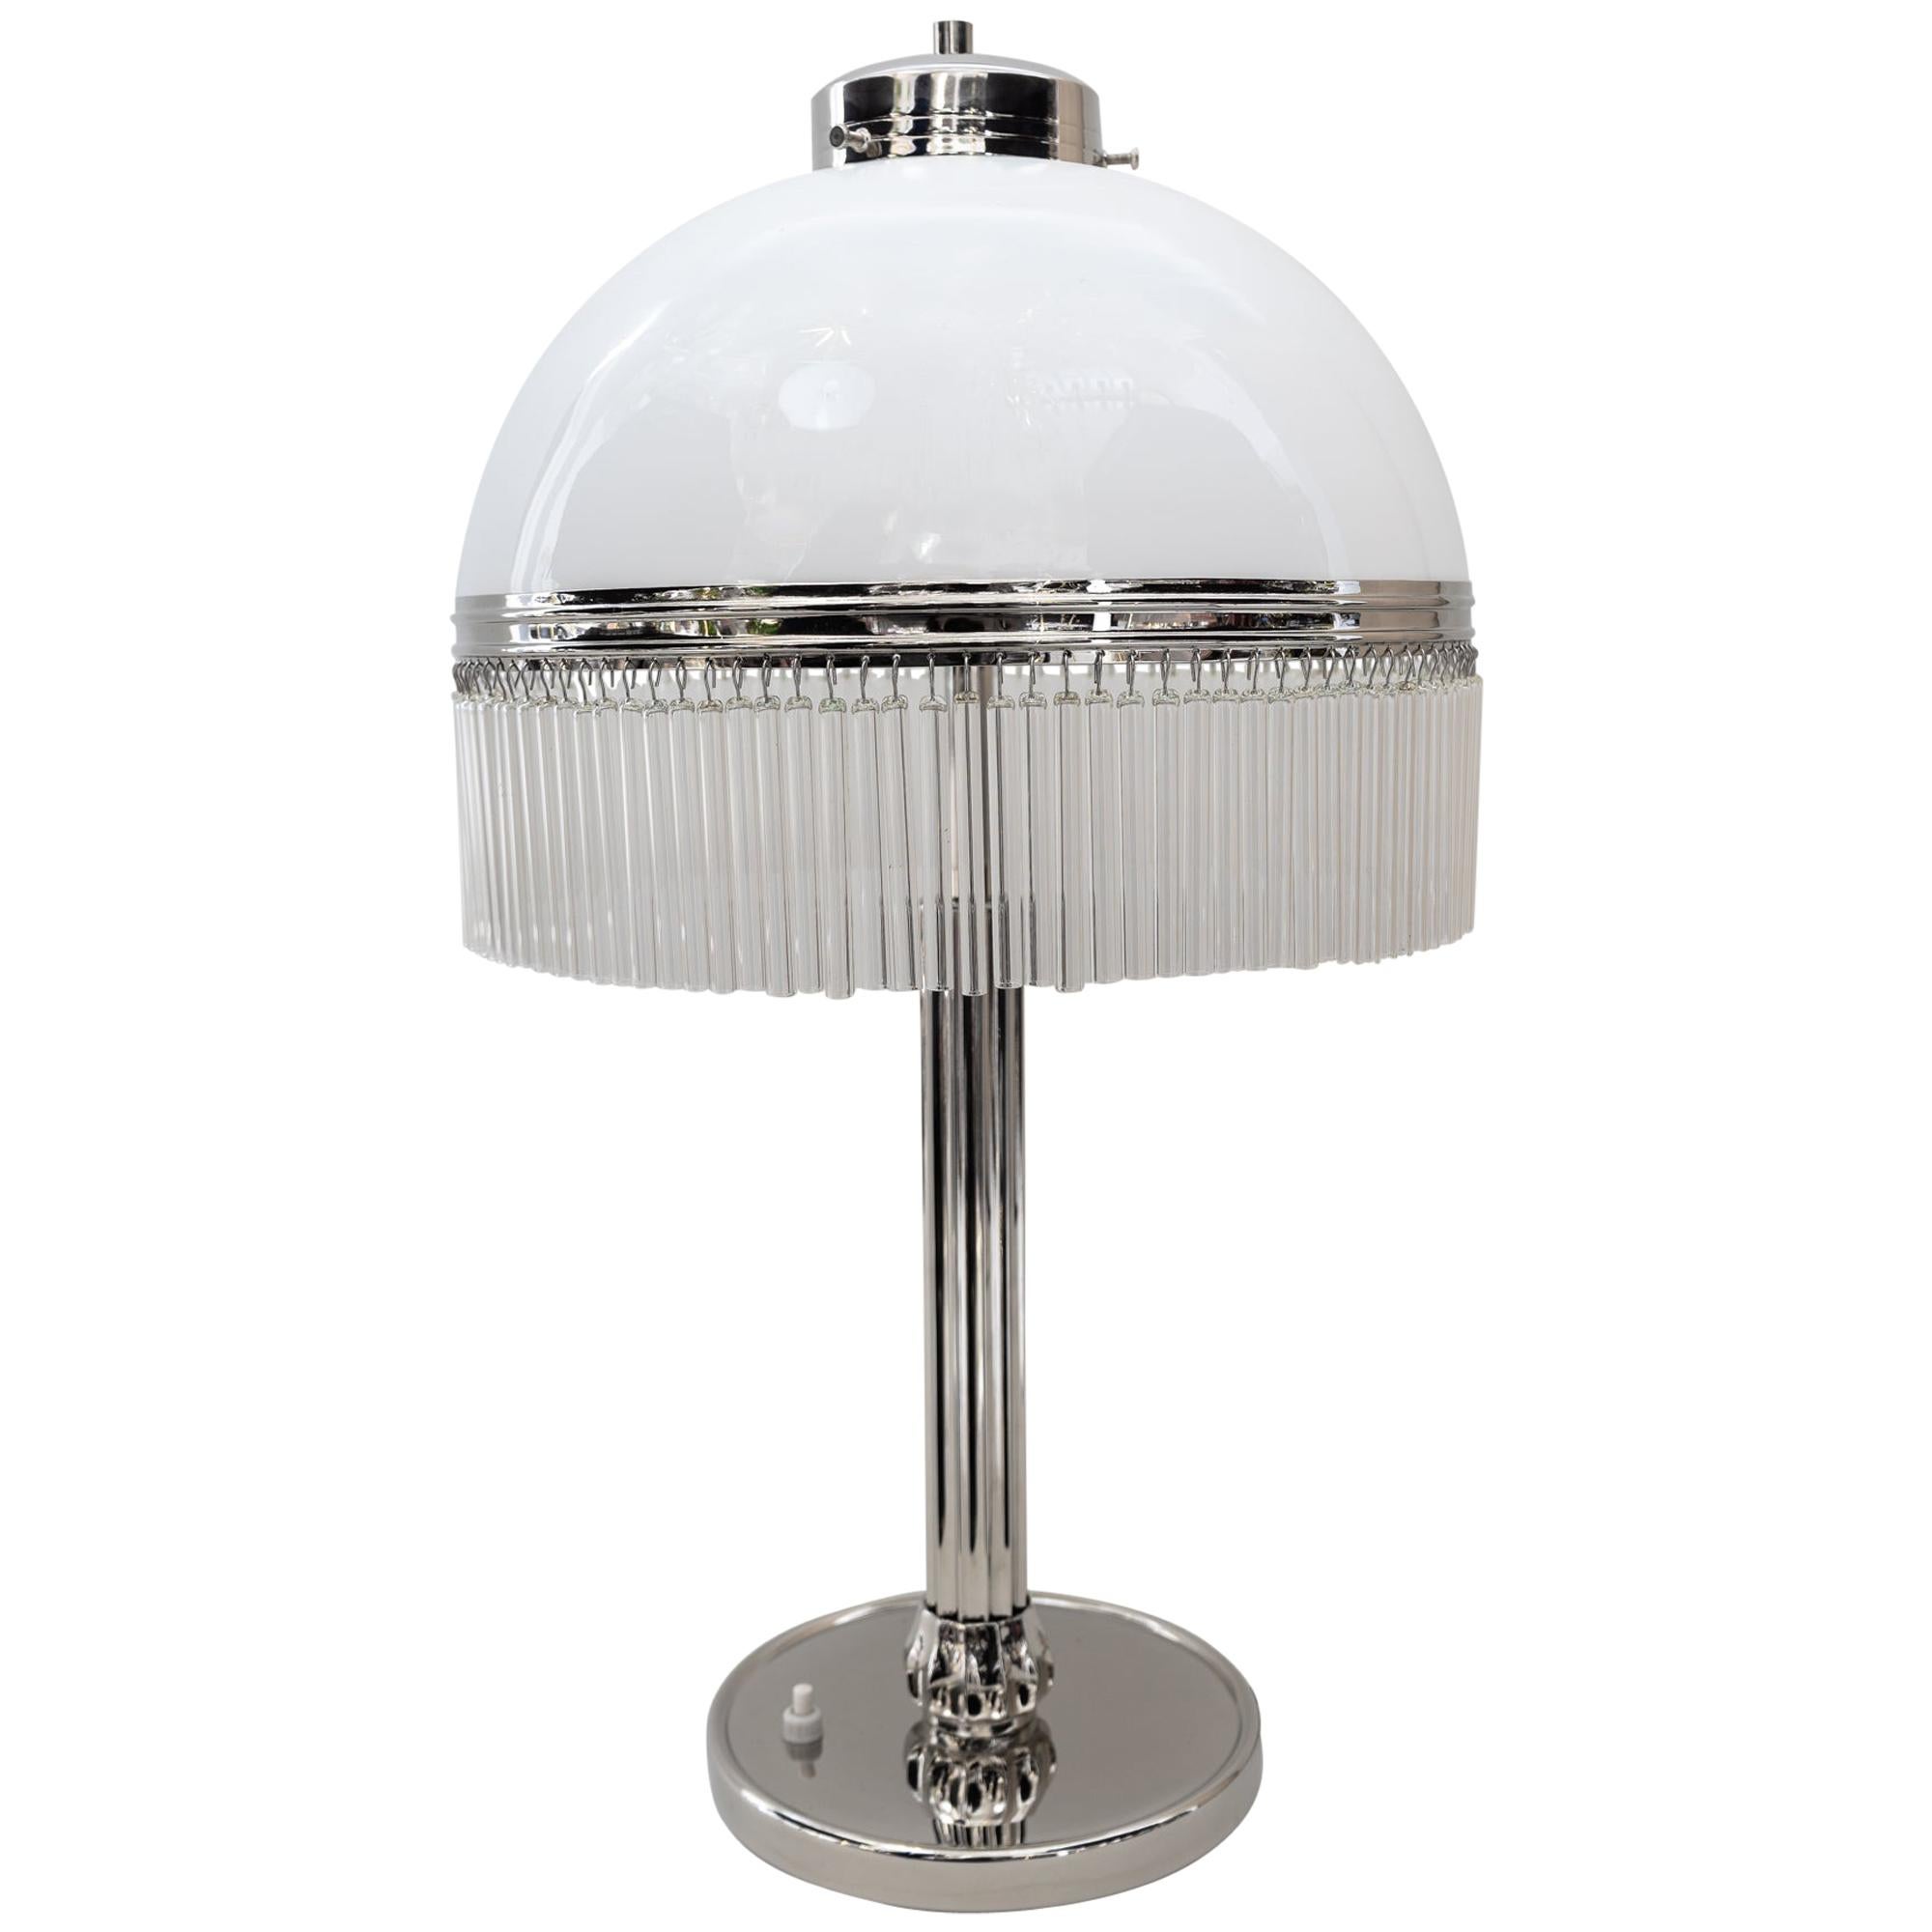 Big Art Deco Table Lamp Nickel-Plated with Original Satined Opal Glas, 1920s